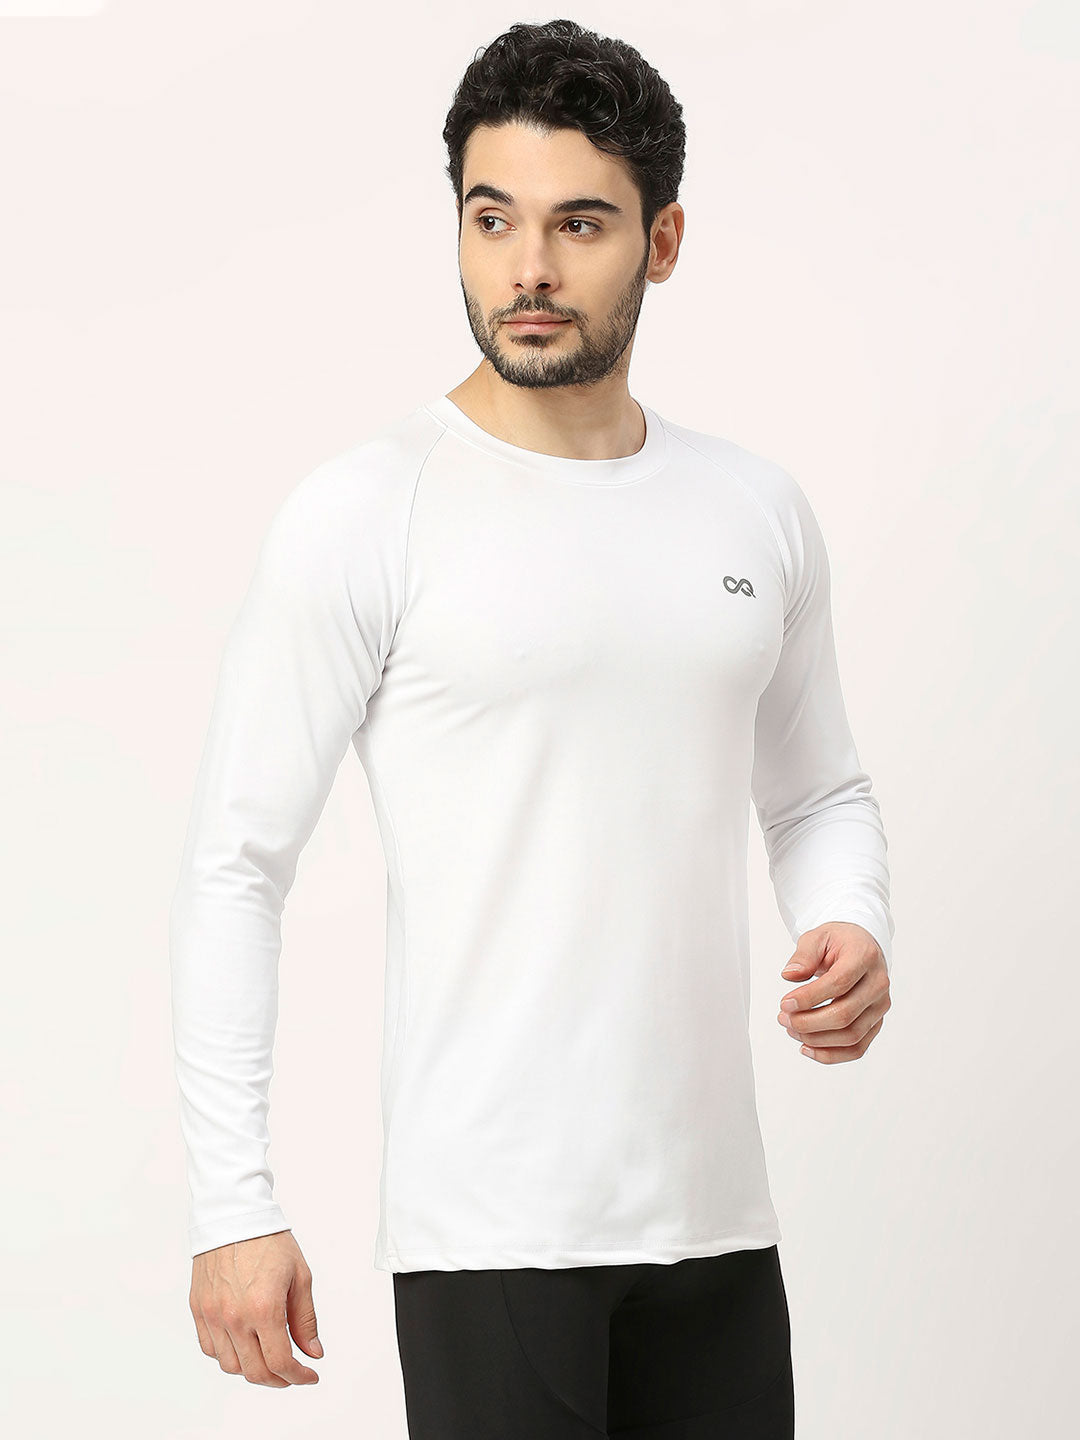 Shop Men's Long Sleeve White Sports T-Shirt - Stay Cool and Stylish on the  Field